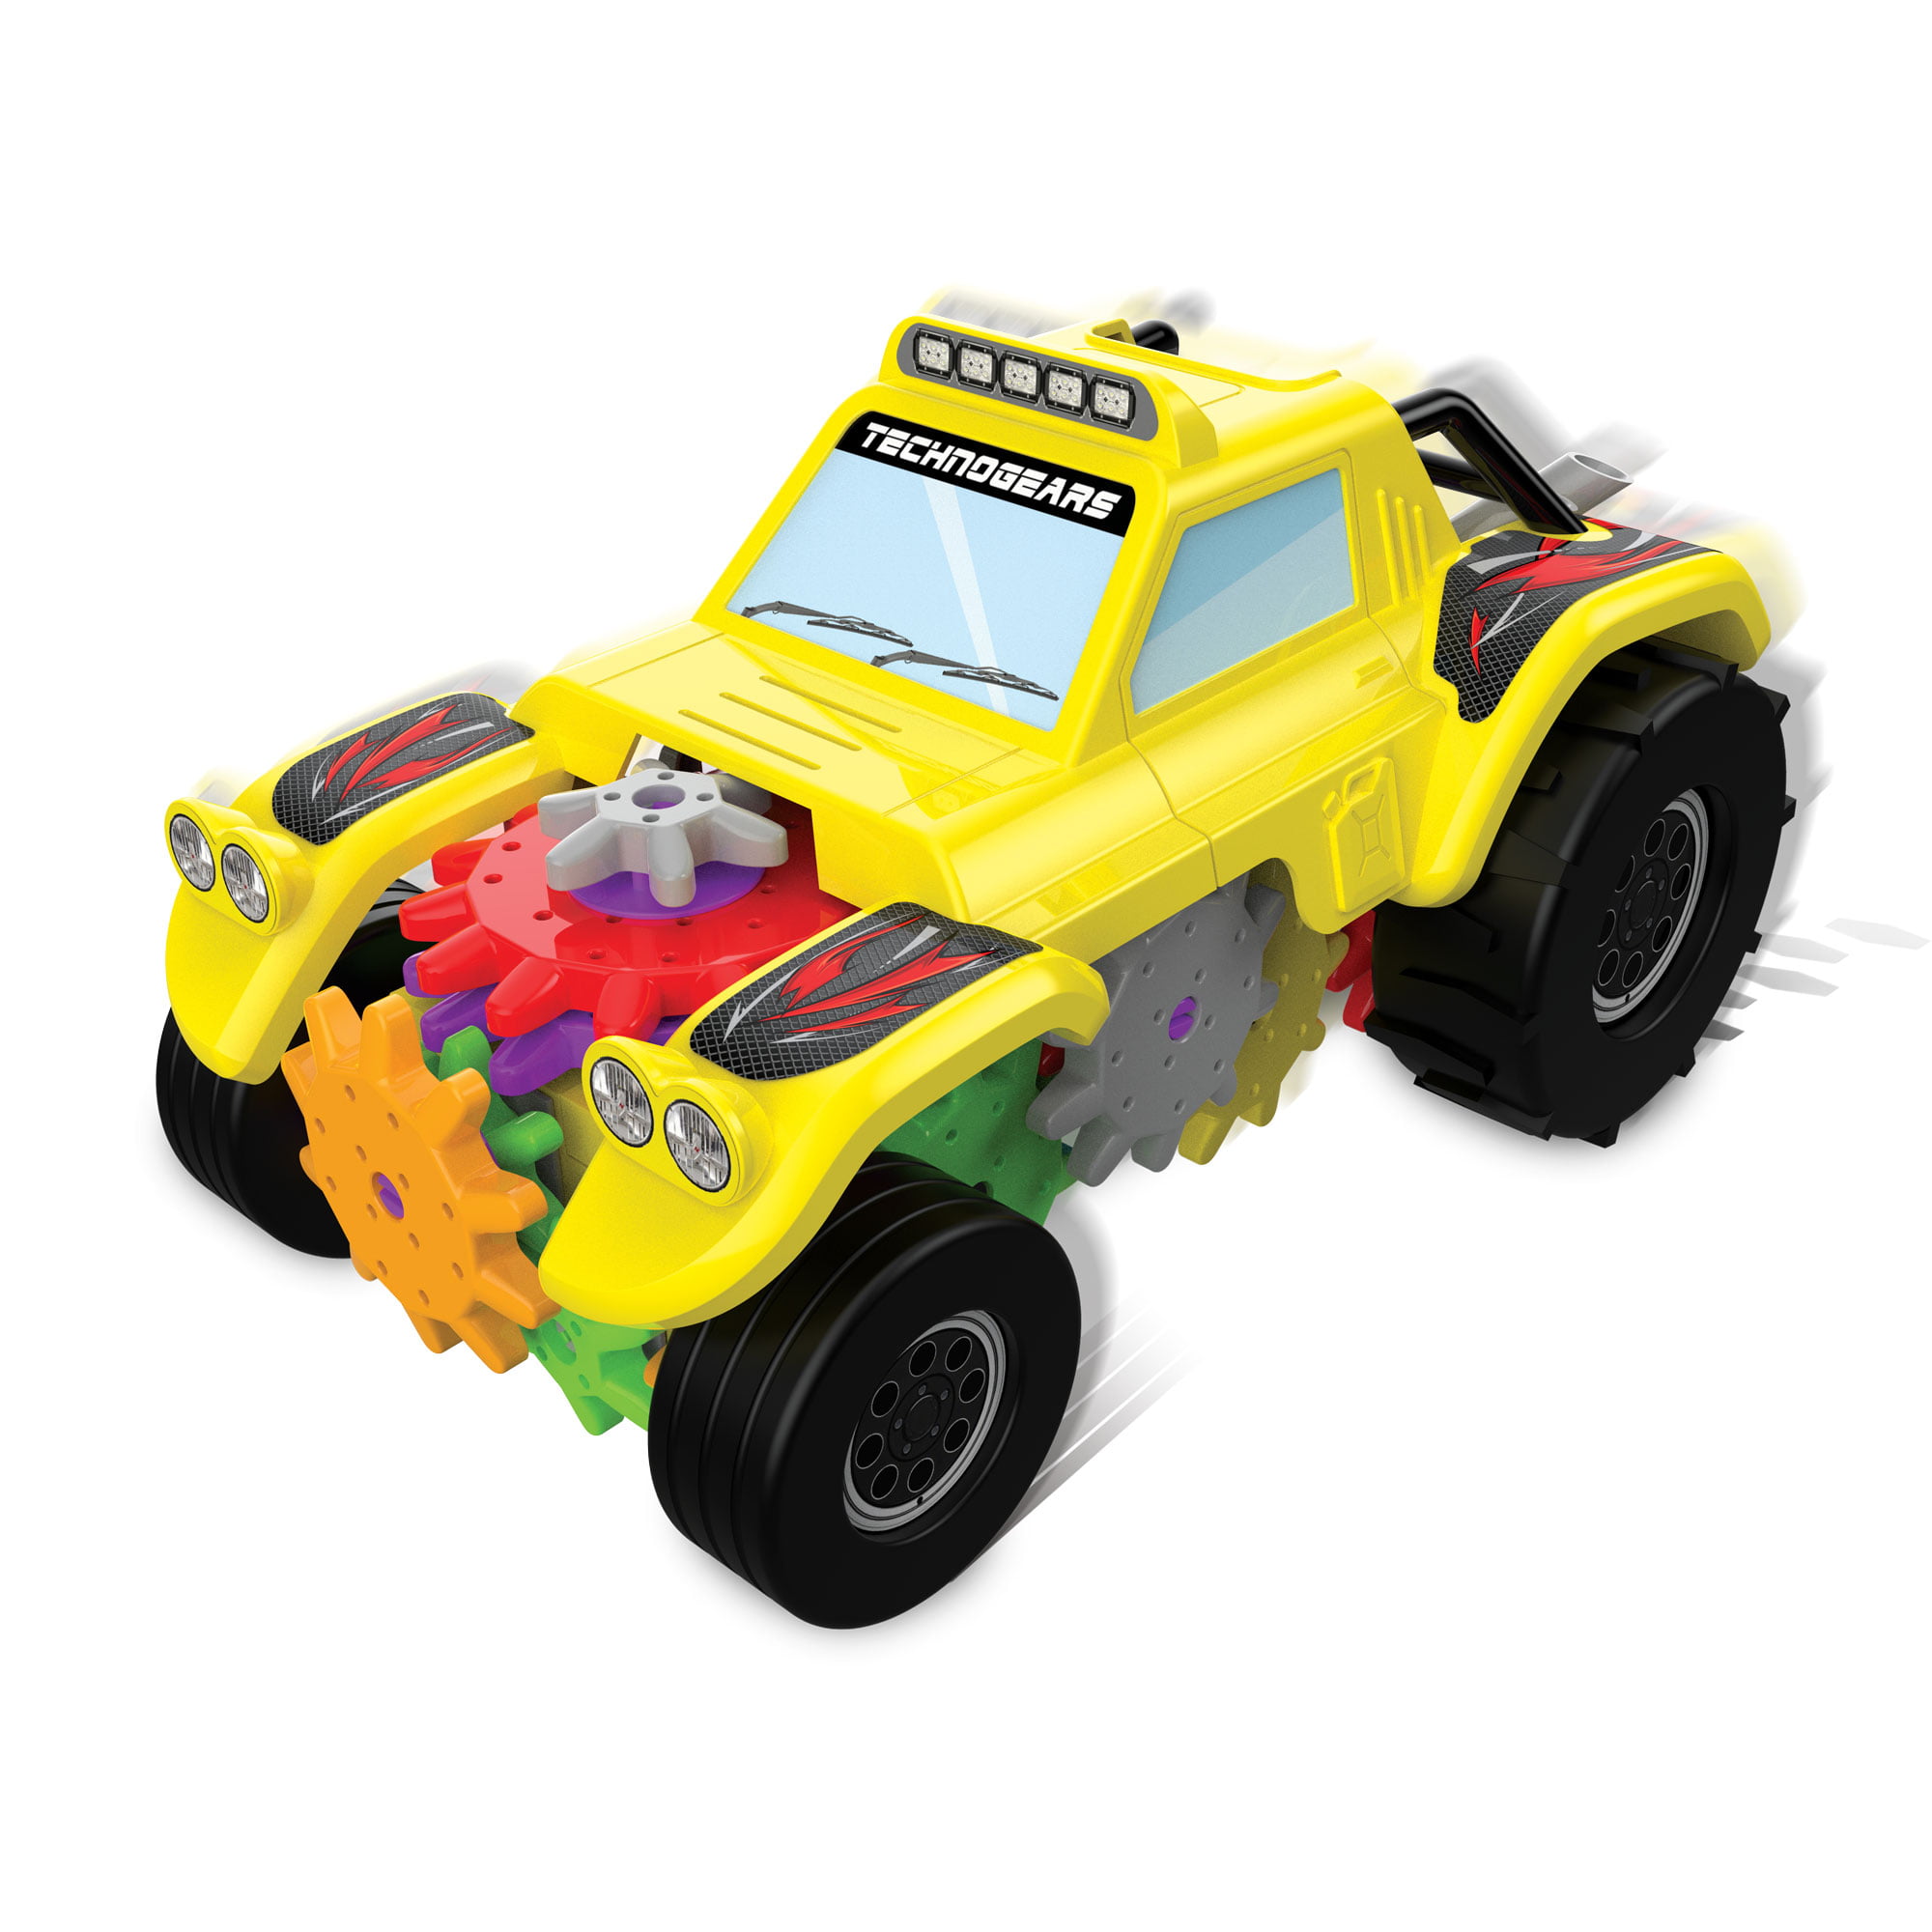 The Learning Journey Educational Construction Engineering STEM Learning 60+ Pieces Kid Toys & Gifts for Boys & Girls Ages 6 Years and Up Techno Gears Award Winning Toys Off Road Racer 